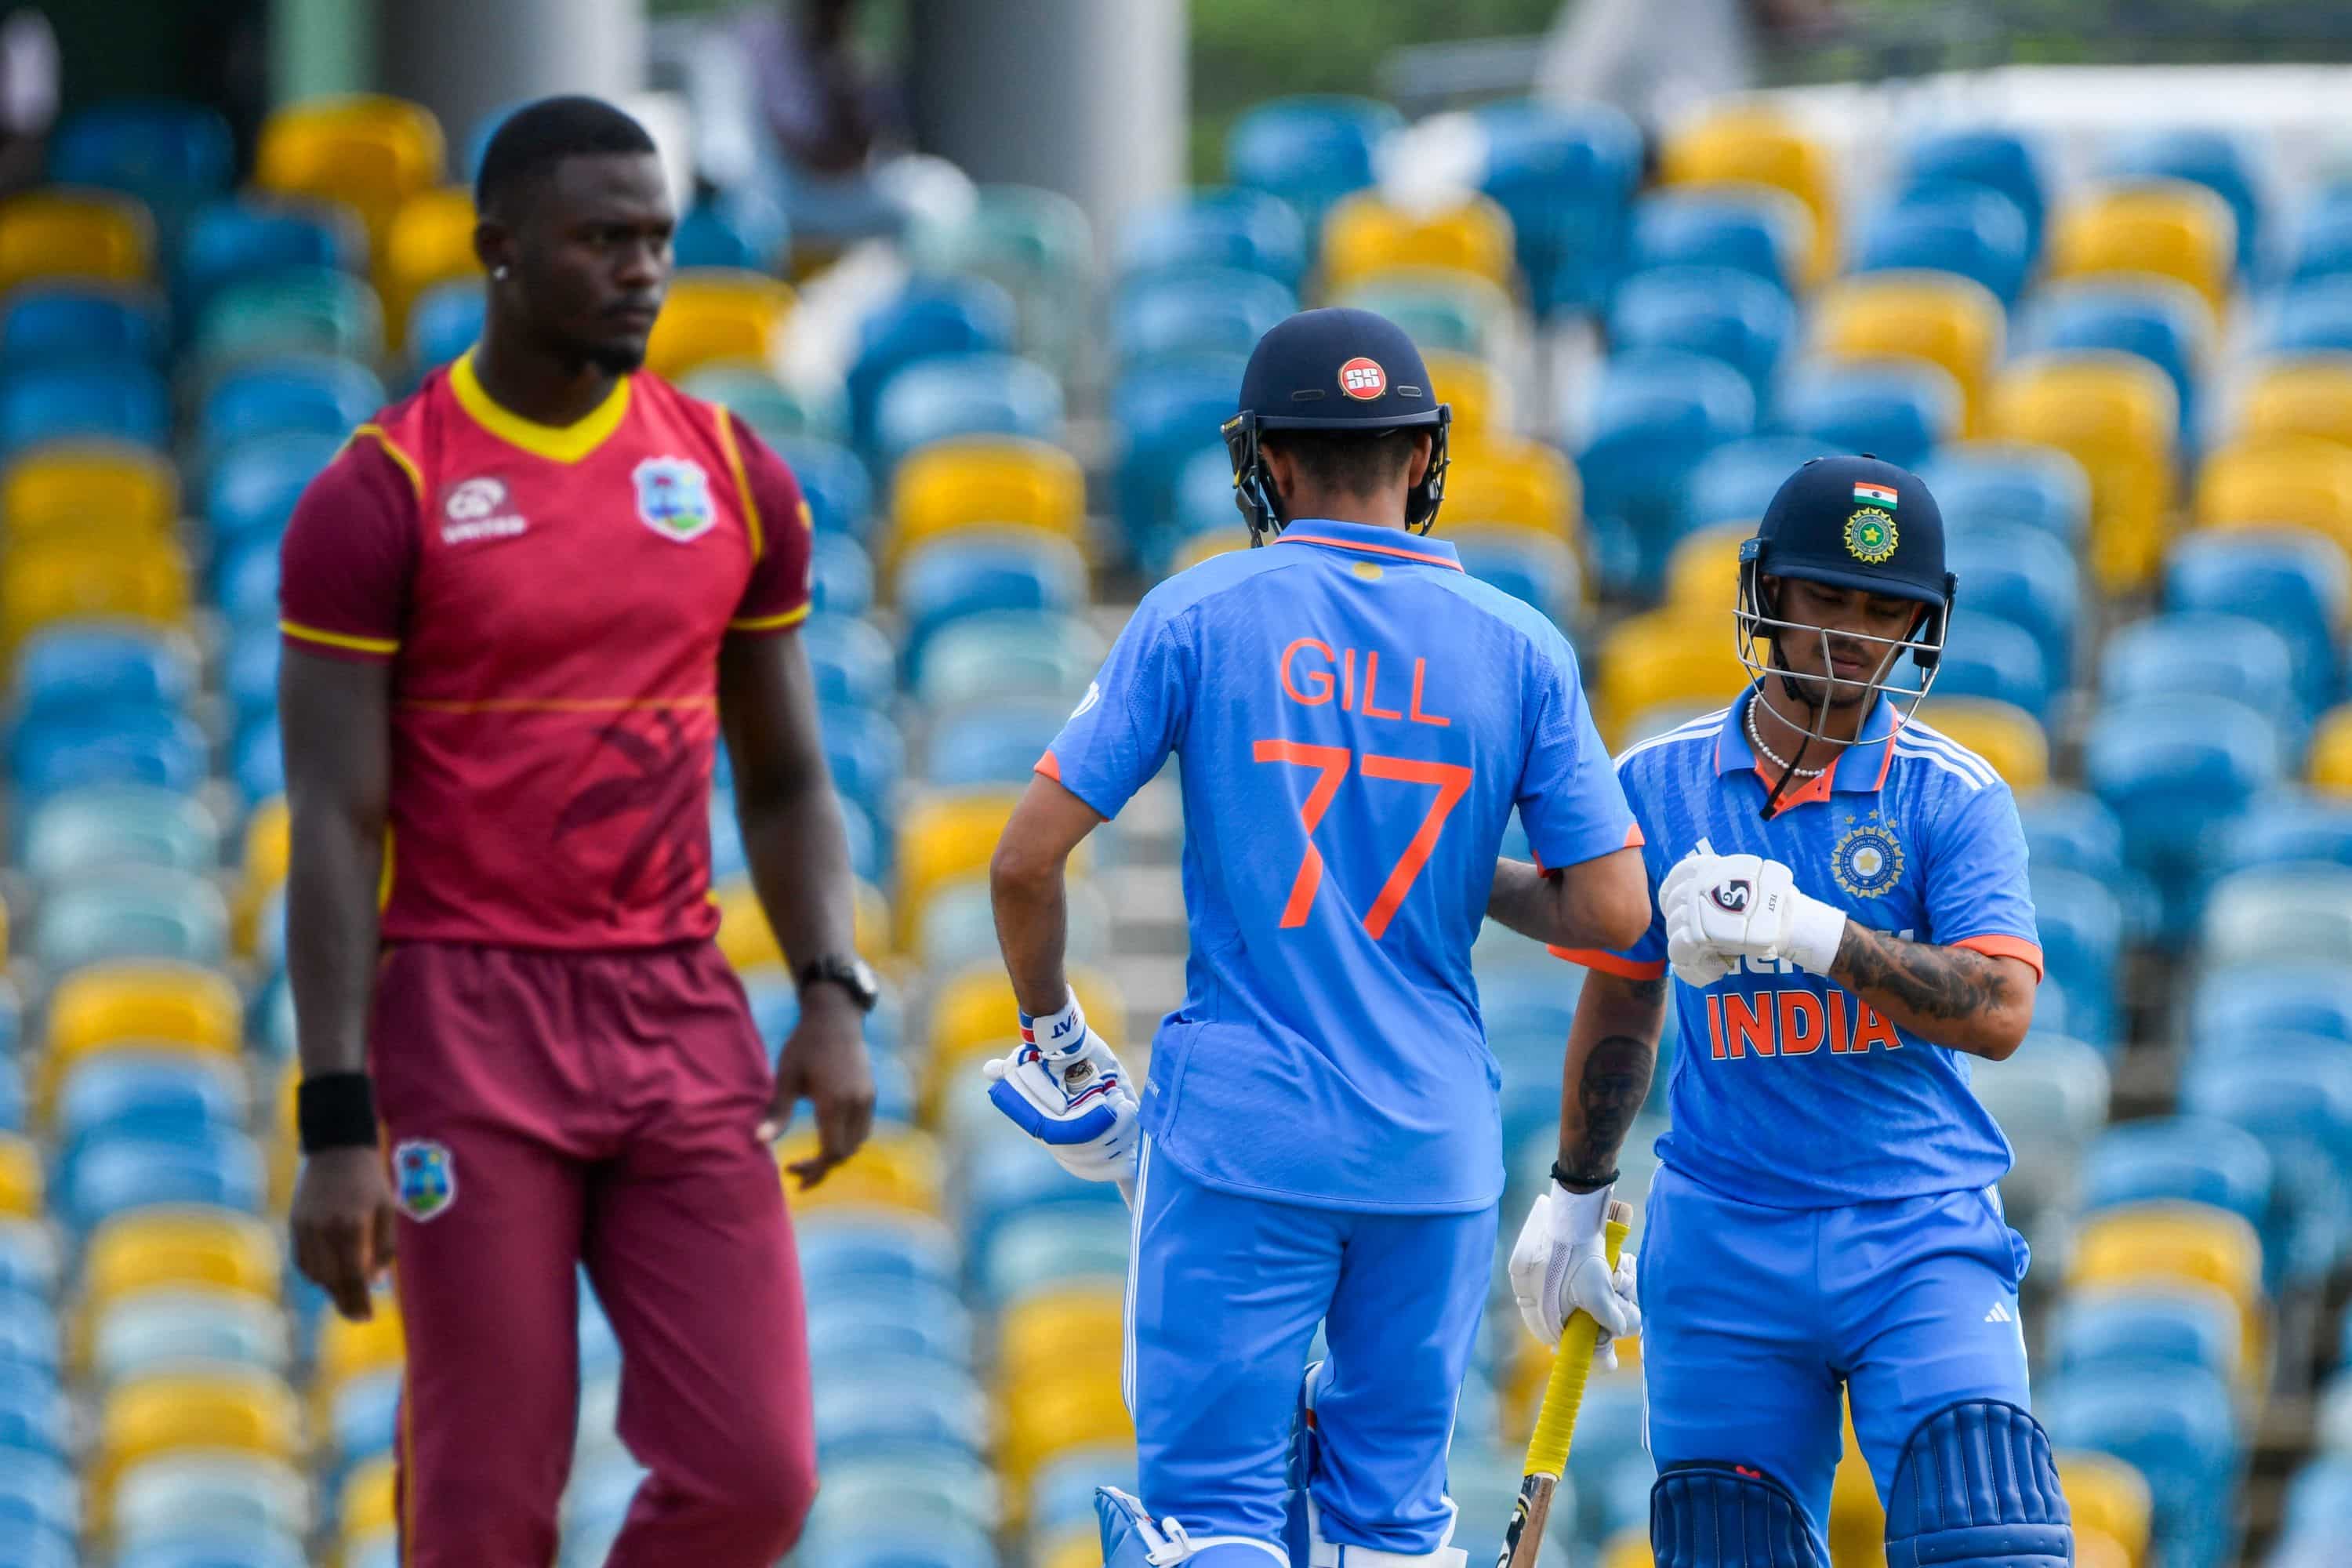 India vs West Indies Free Live Streaming When and where to watch IND vs WI 3rd ODI on TV, Mobile Apps 2nd ODI recap Zee Business